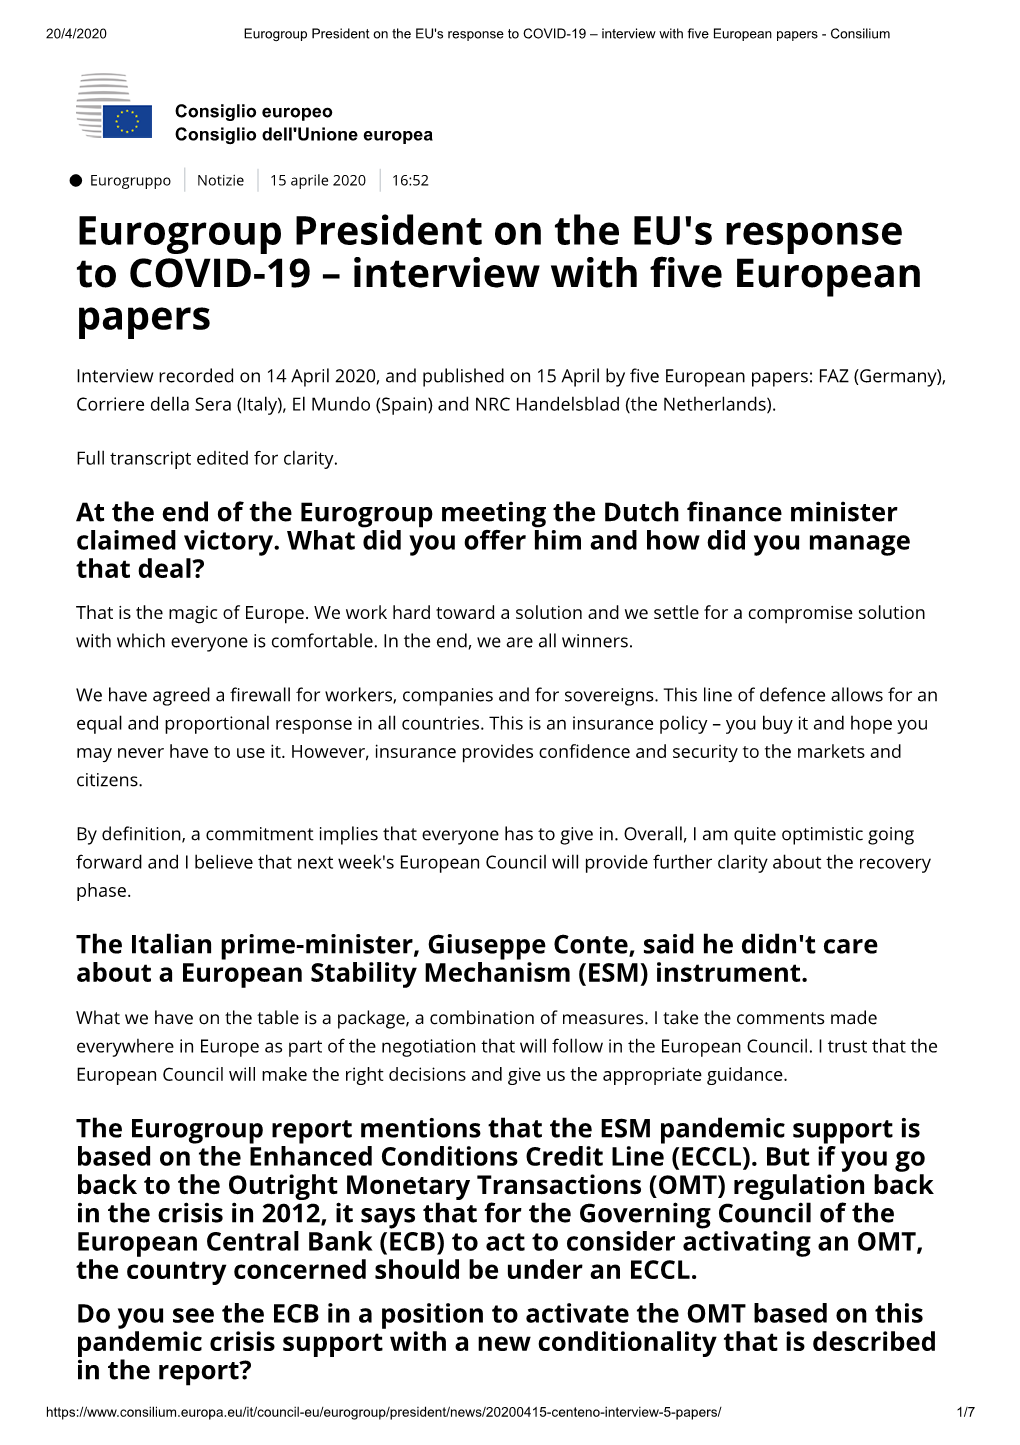 Eurogroup President on the EU's Response to COVID-19 – Interview with Five European Papers - Consilium